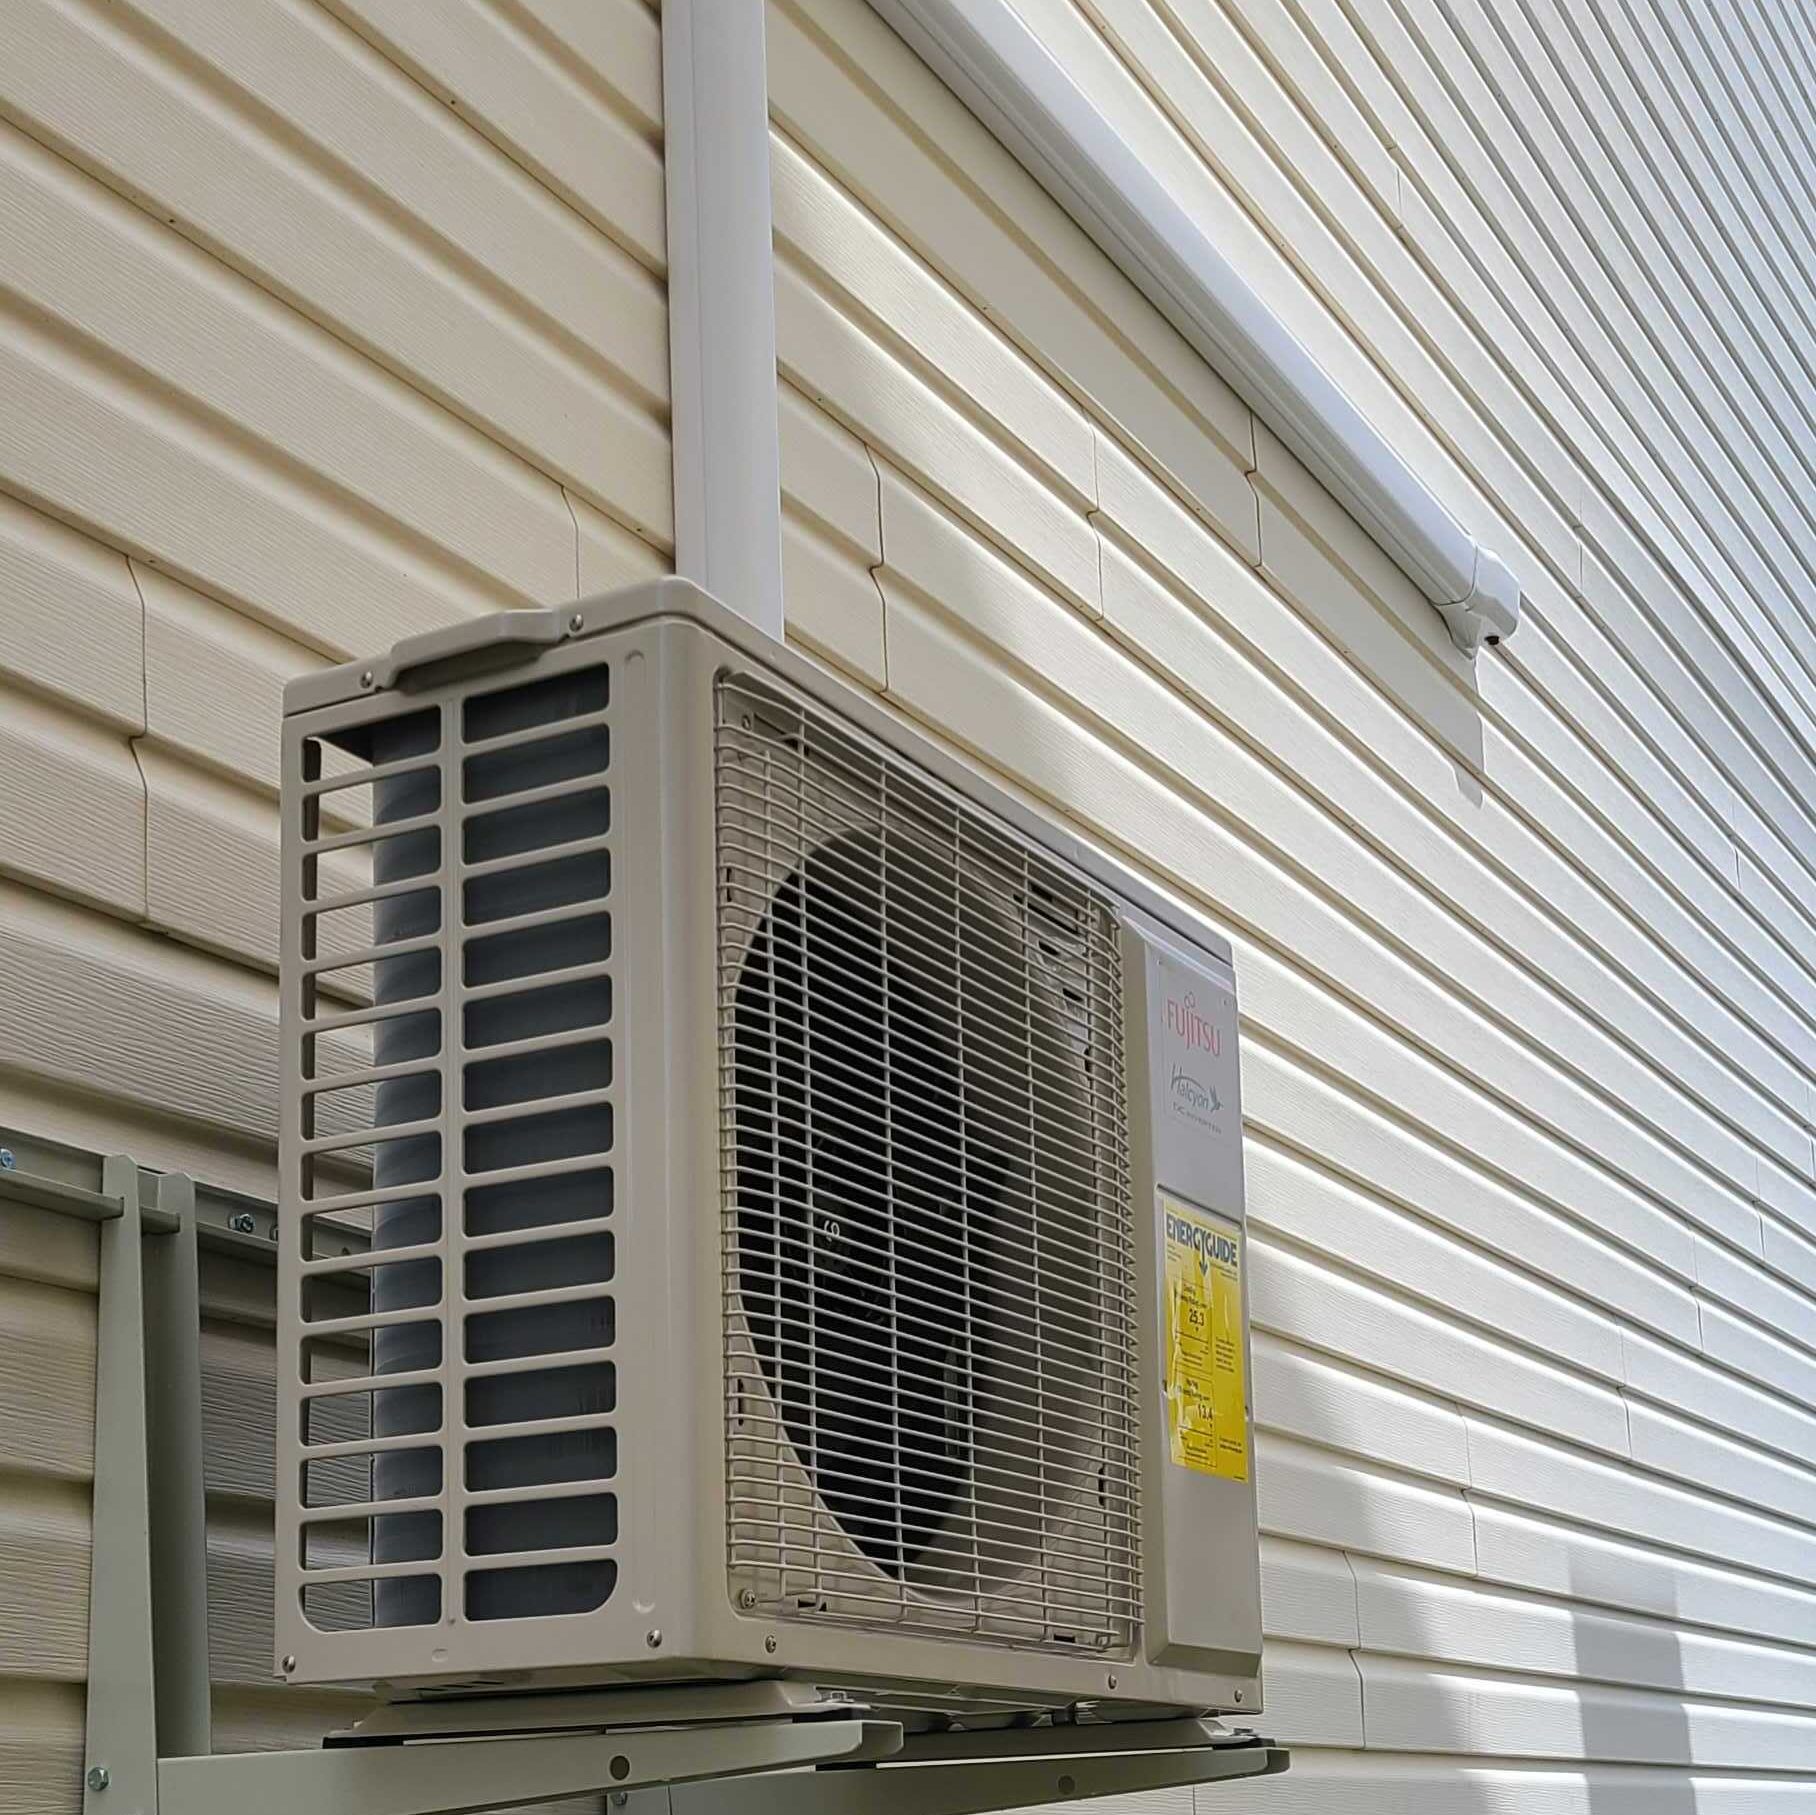 Ductless-Mini-split-installation-near-Ridley-Township-PA.-McGinley-Services-heating-and-cooling